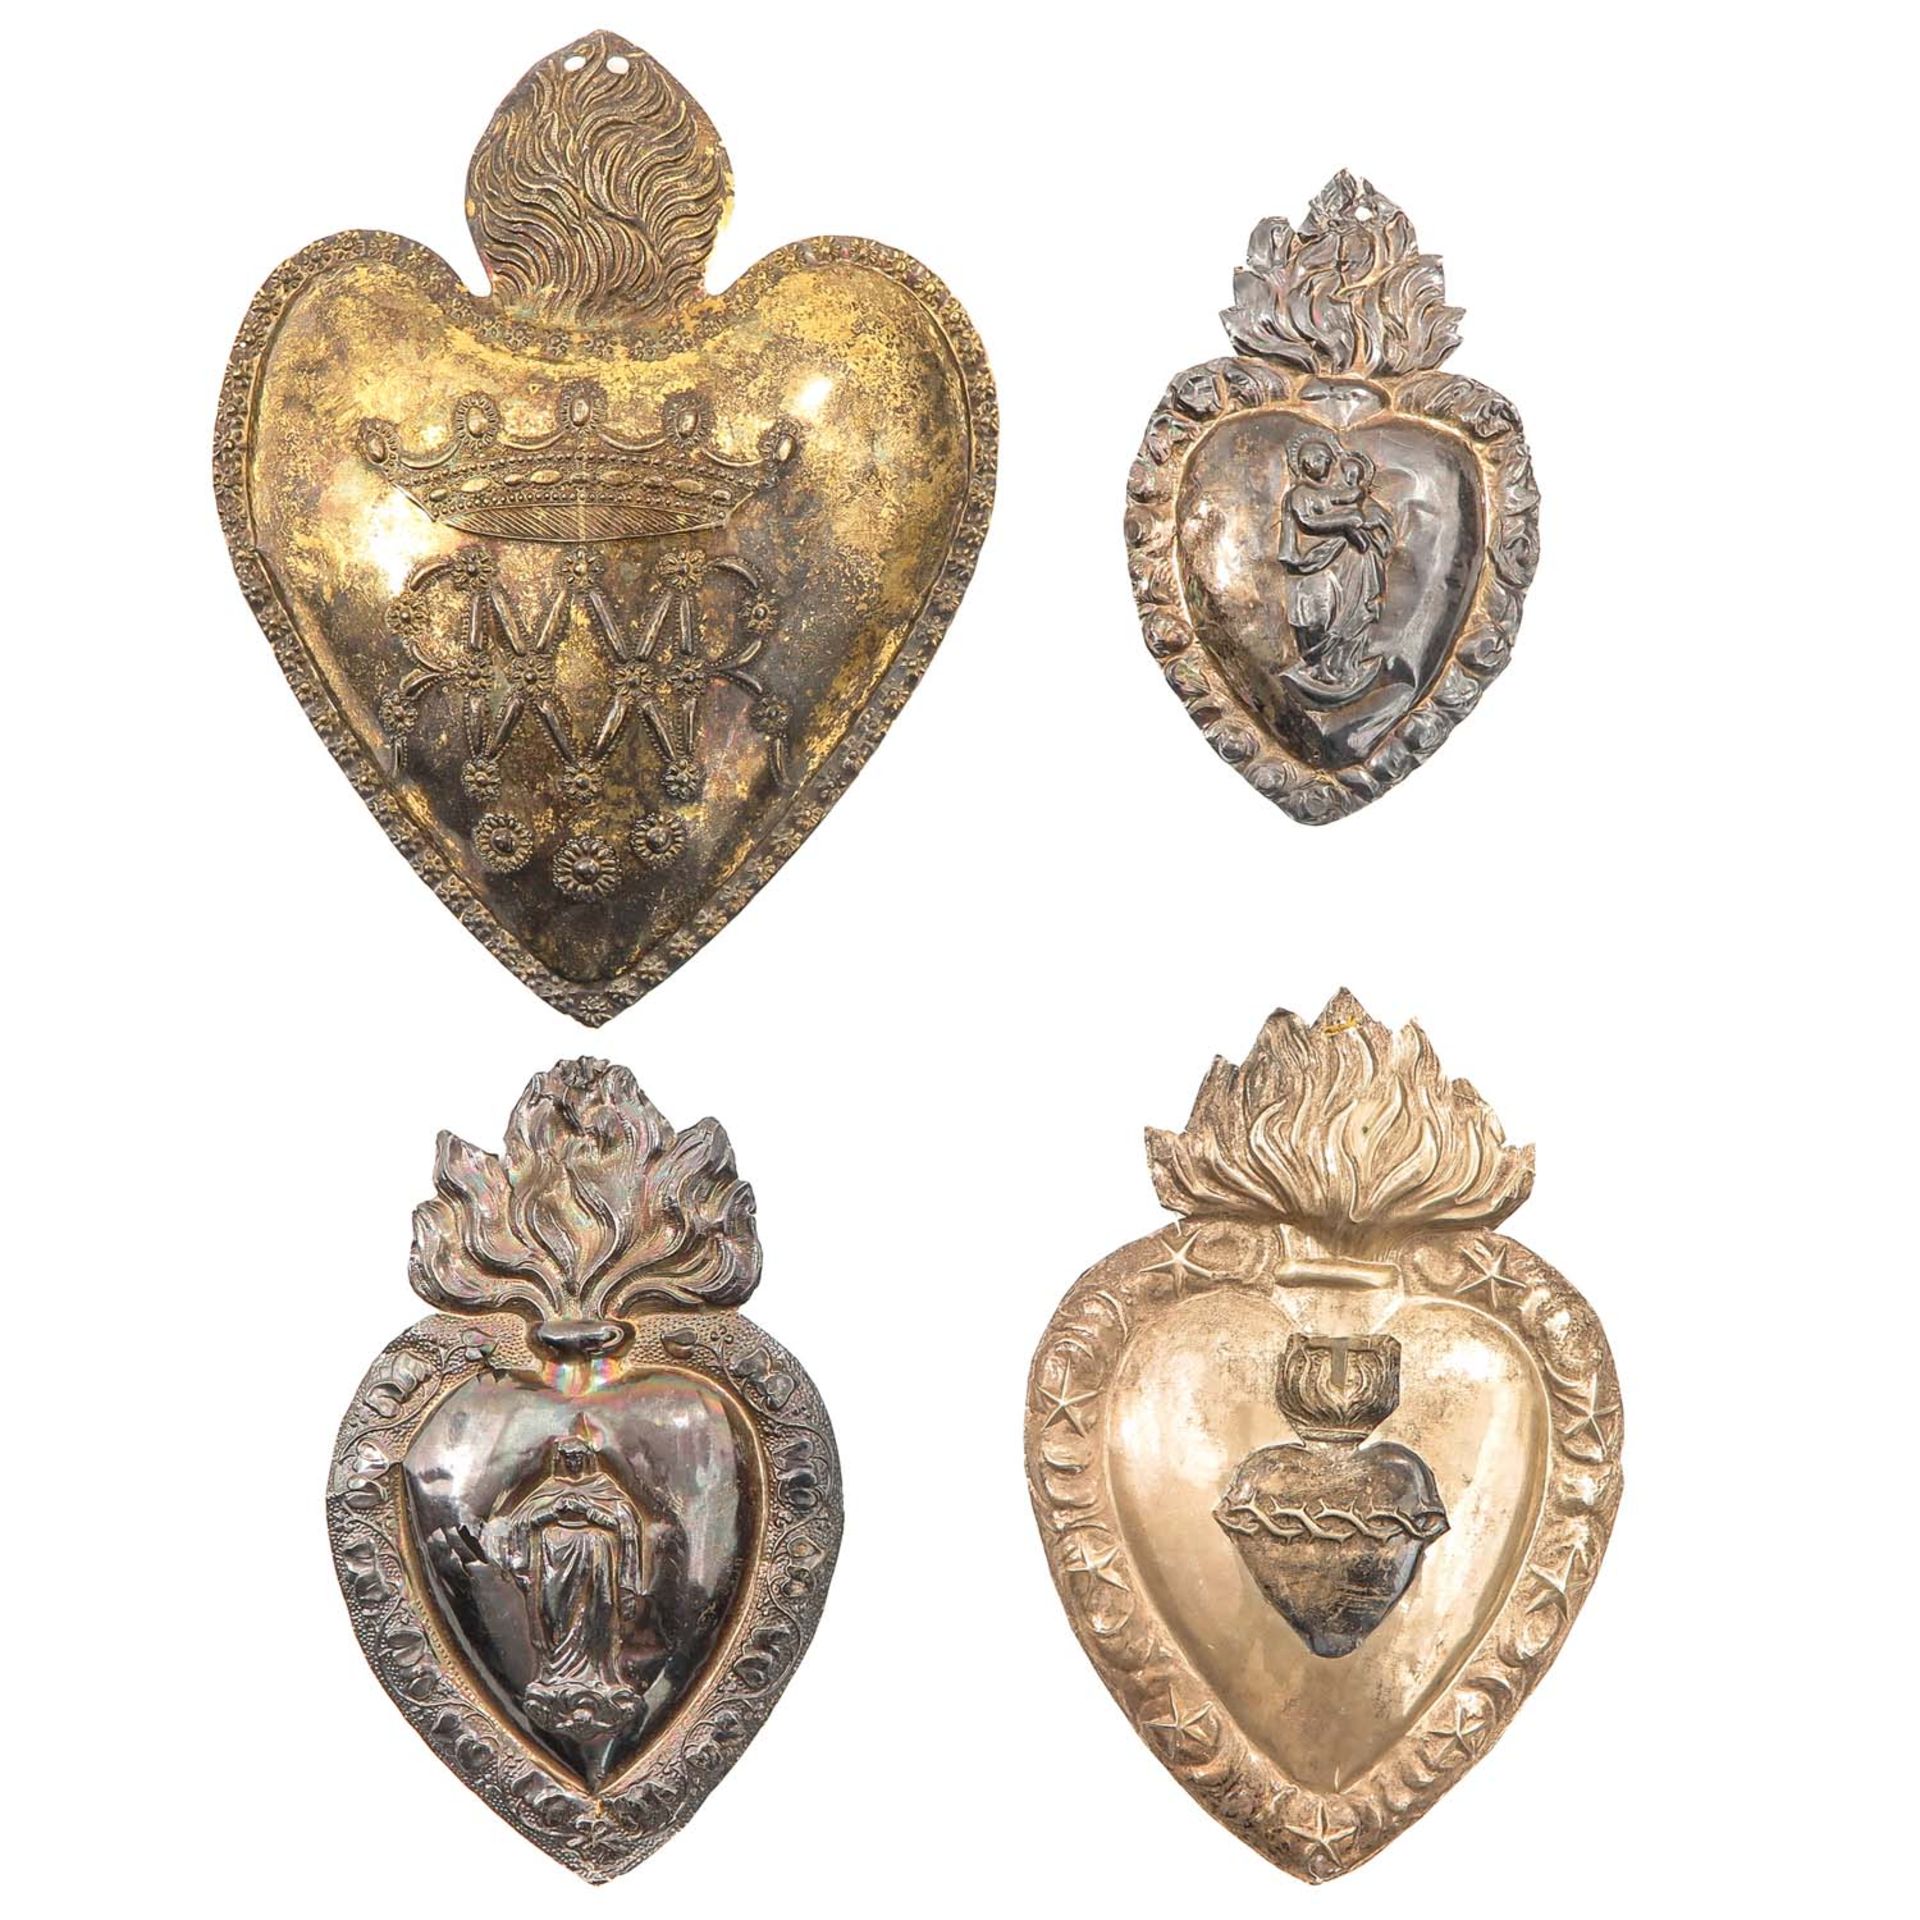 A Collection of 4 Silver Hearts